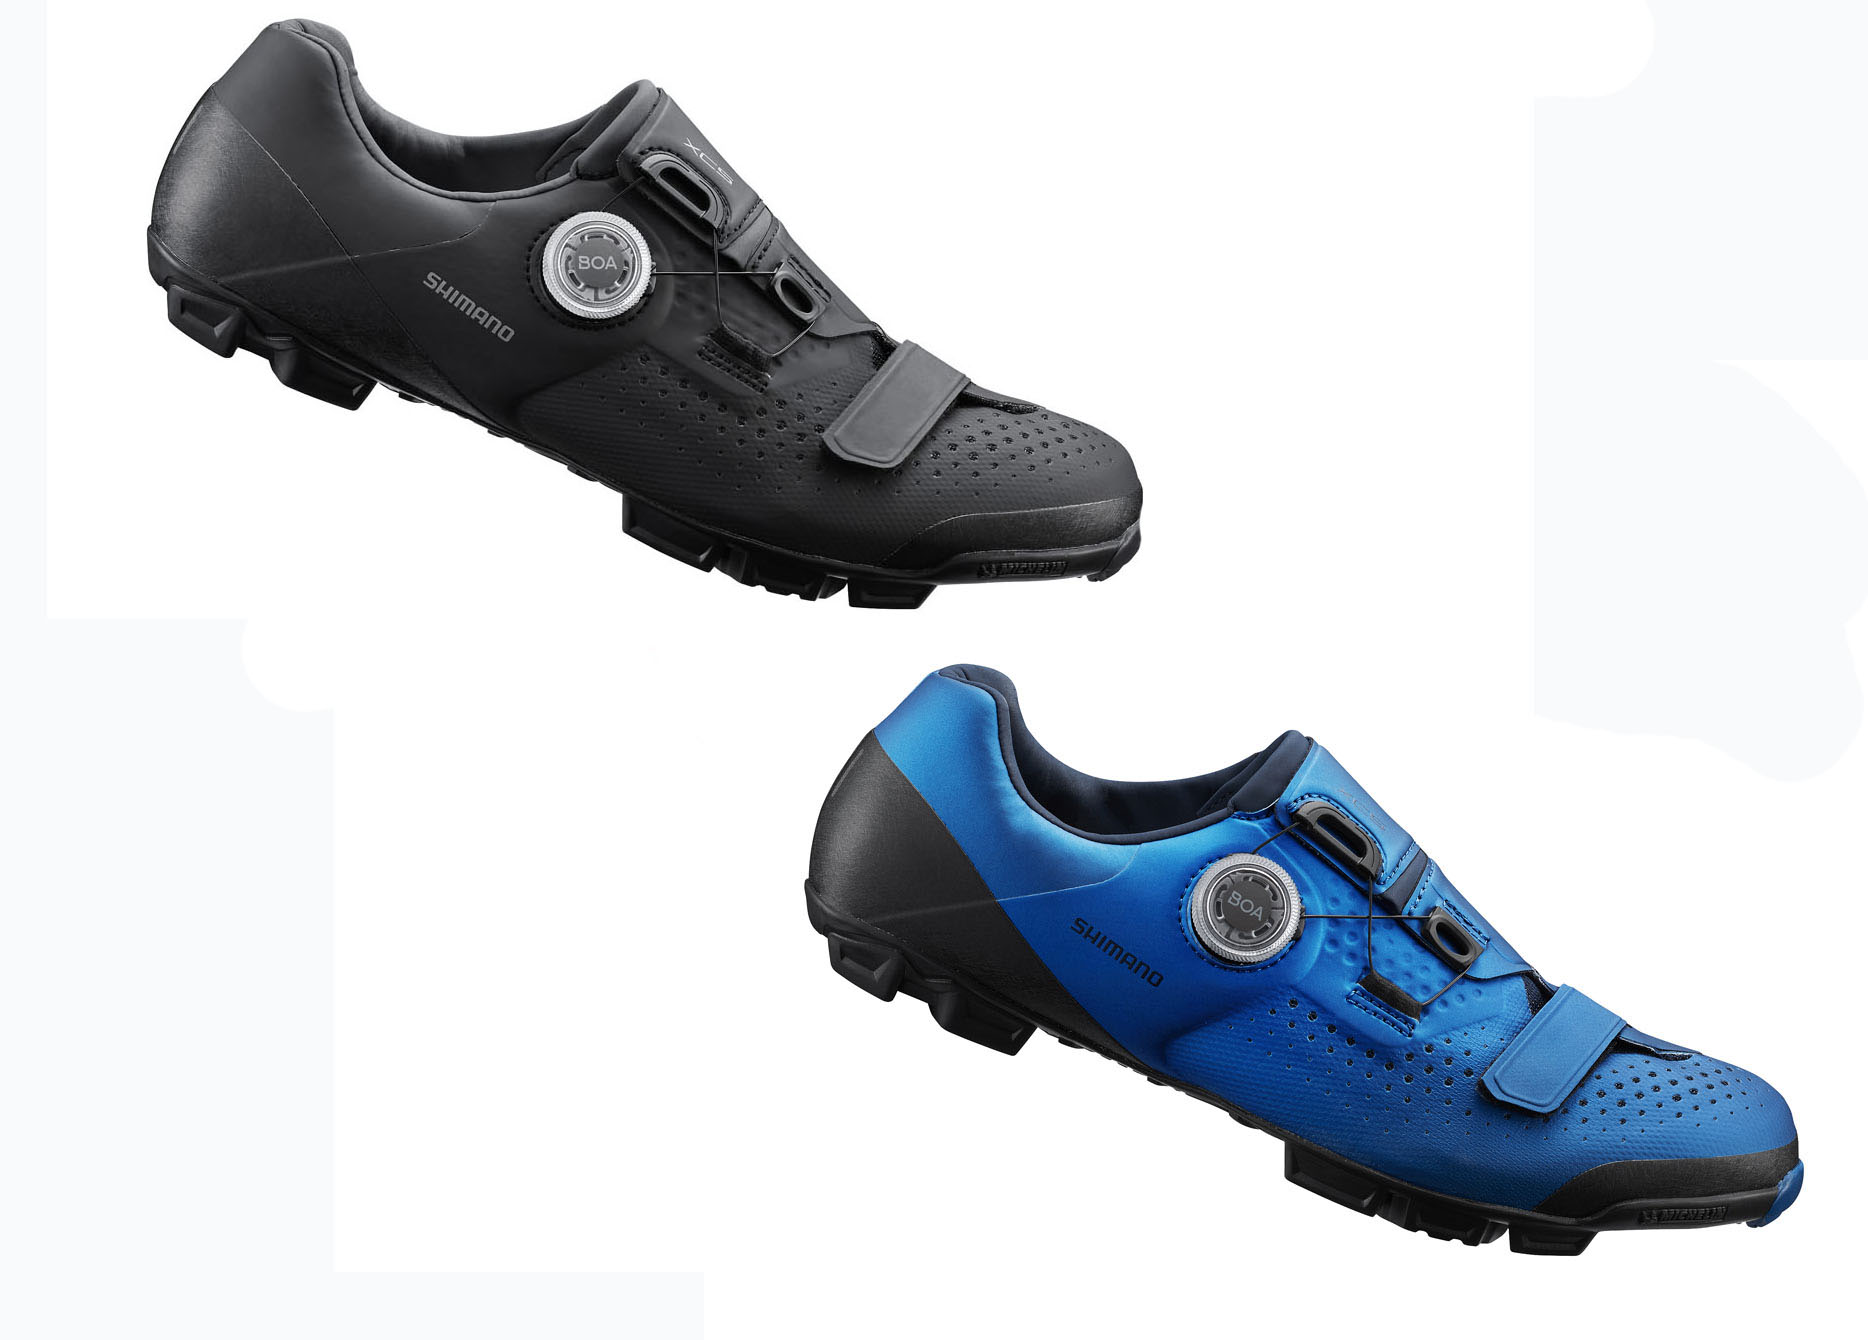 Shimano adds colorful new cycling footwear for road, XC, and gravity